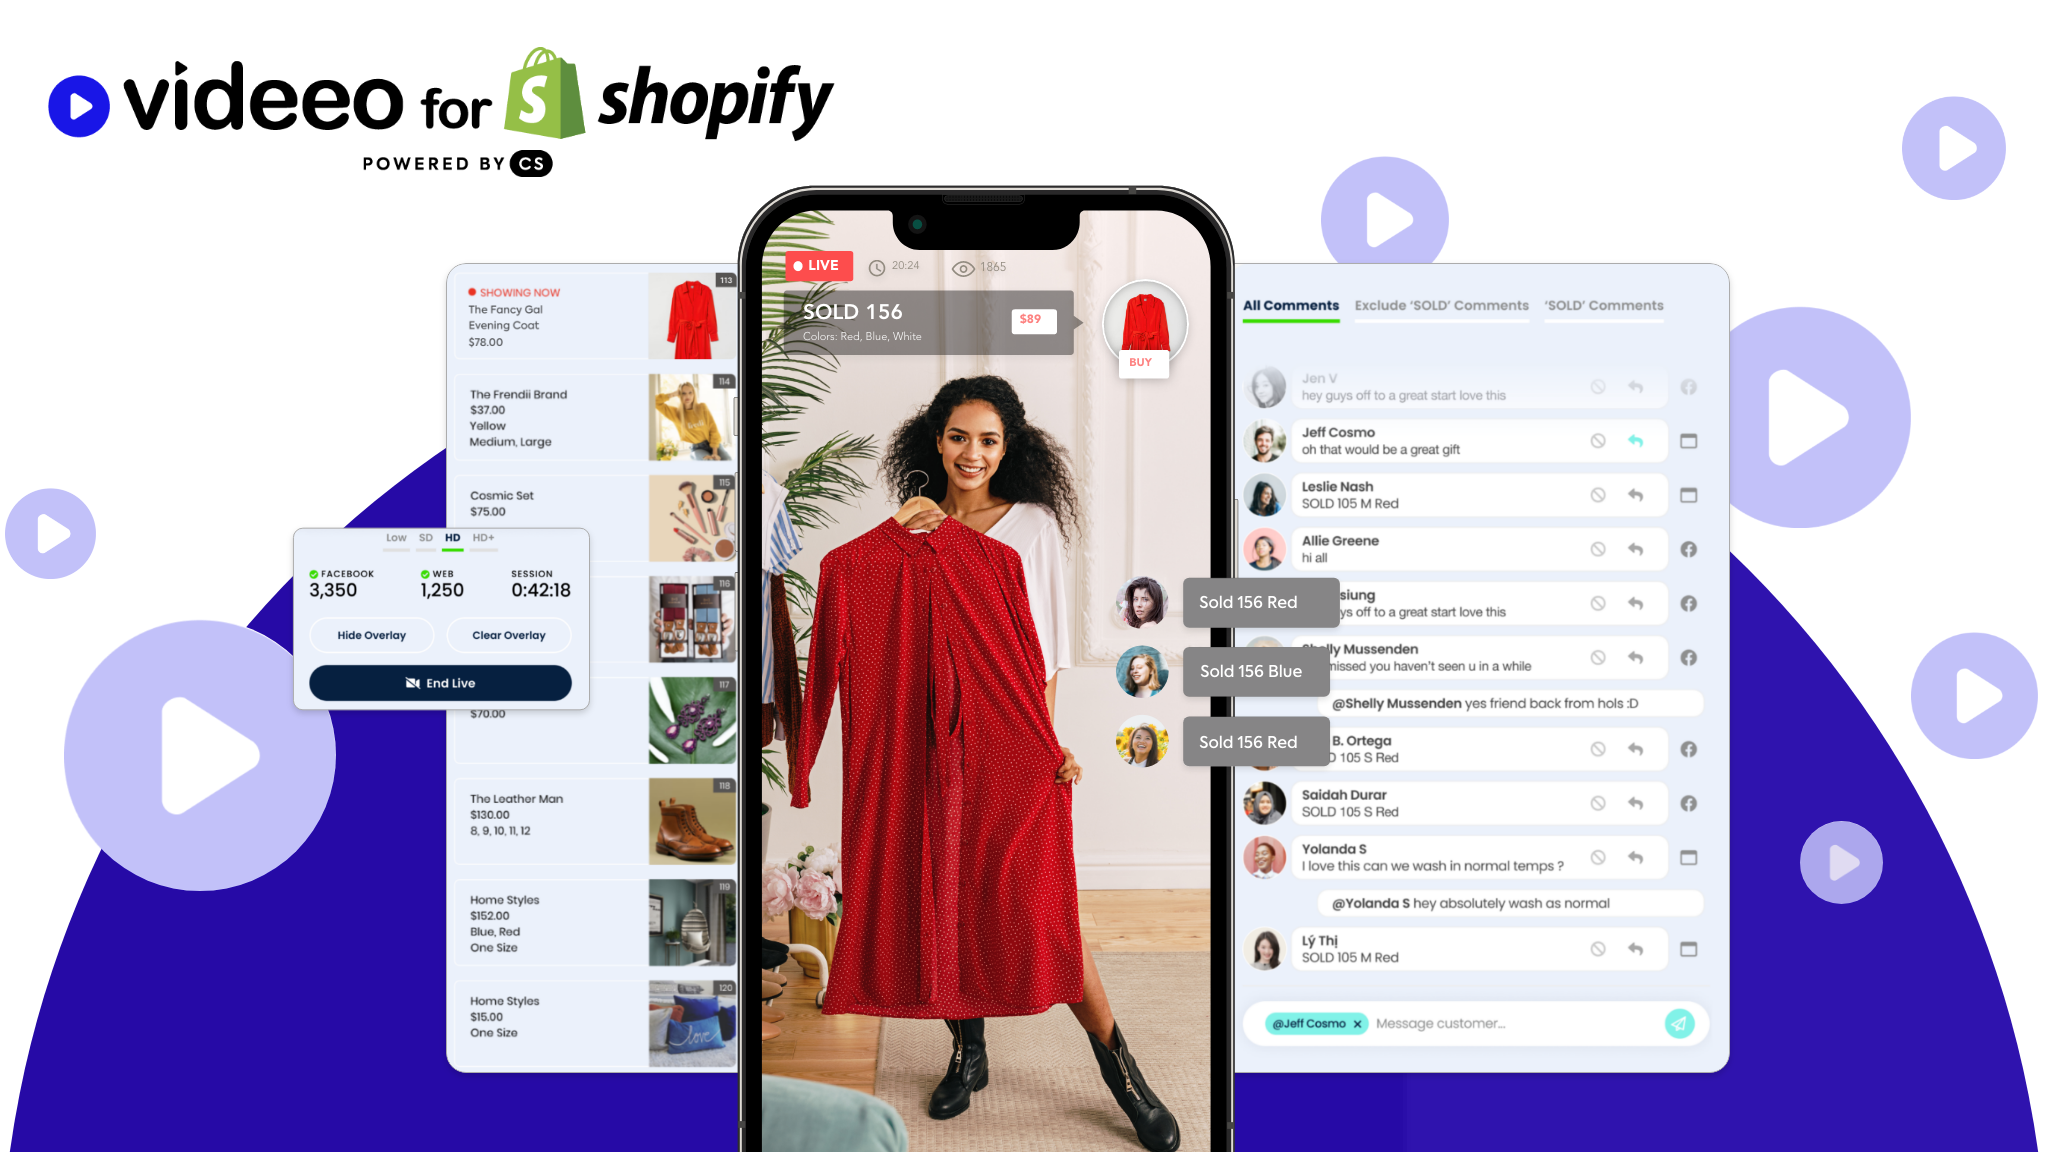 Videeo for Shopify powered but CommentSold